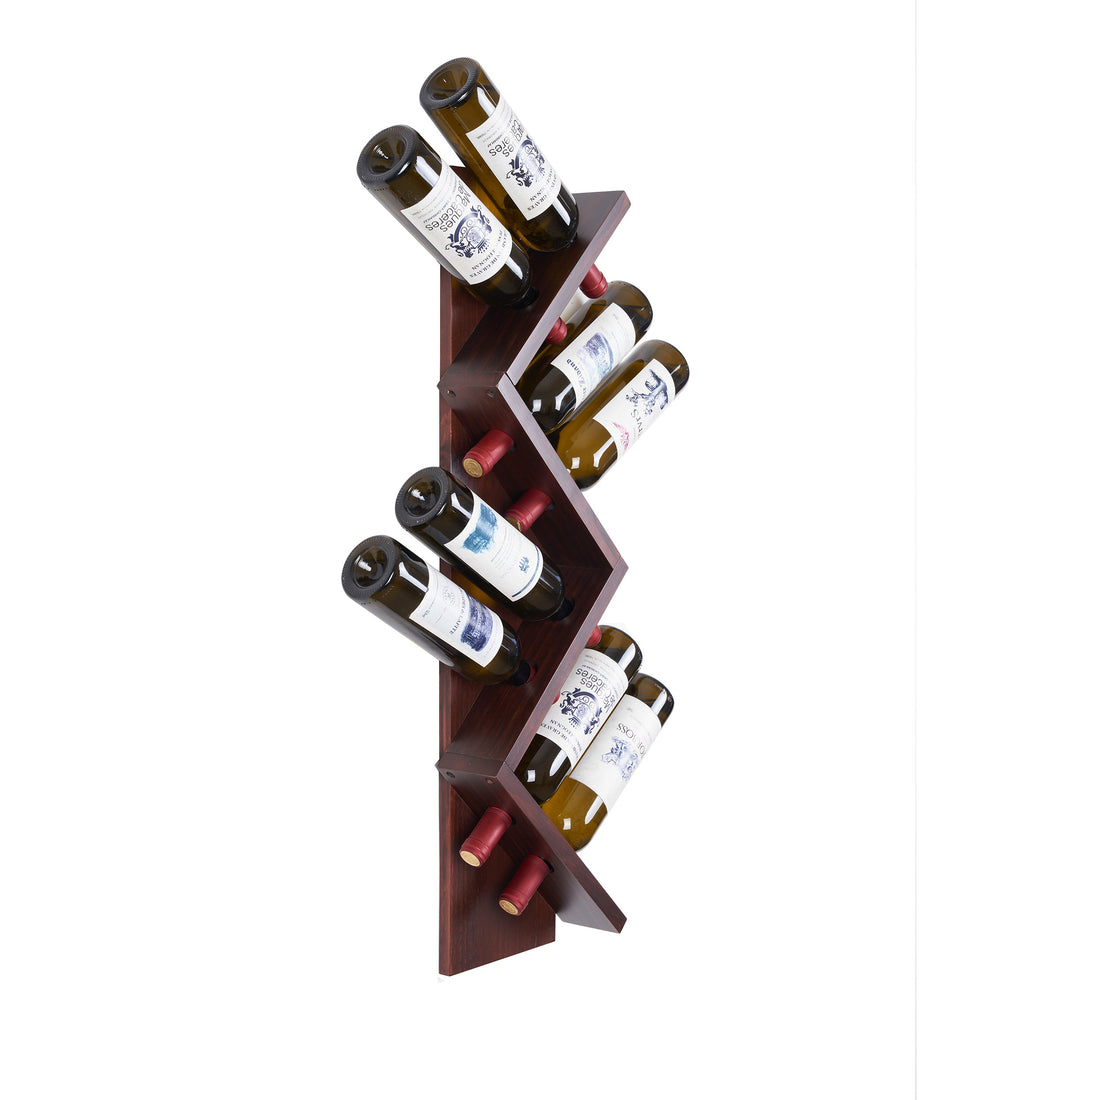 Vertical Z wine rack wine rack wall mounted Solid wood walnut-kitchen-american traditional-pine